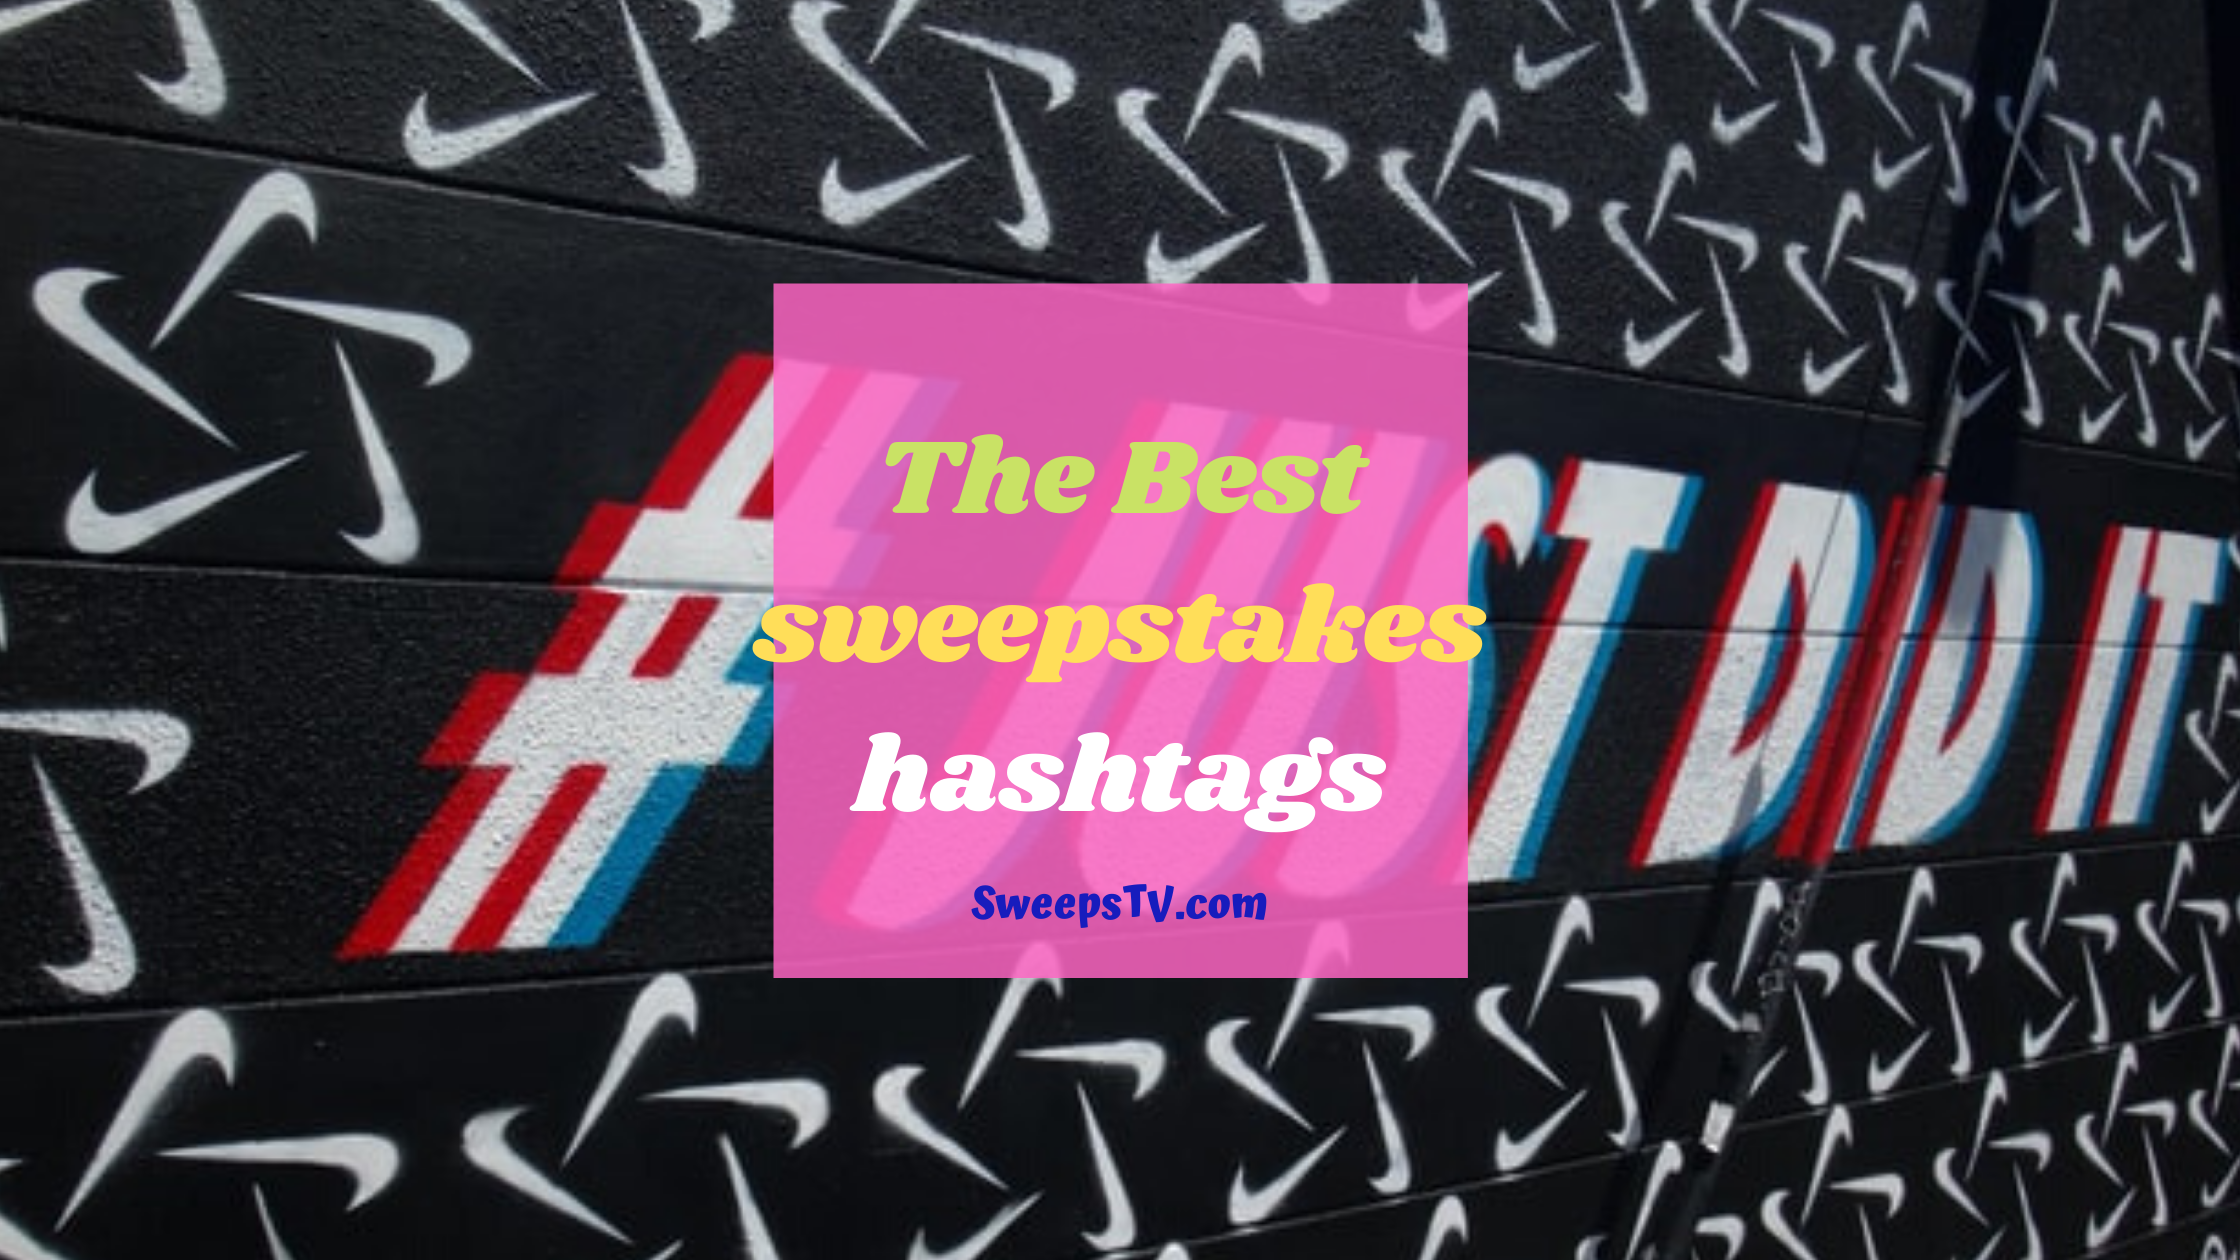 The Top Ten Sweepstakes Hashtags You Should Know About